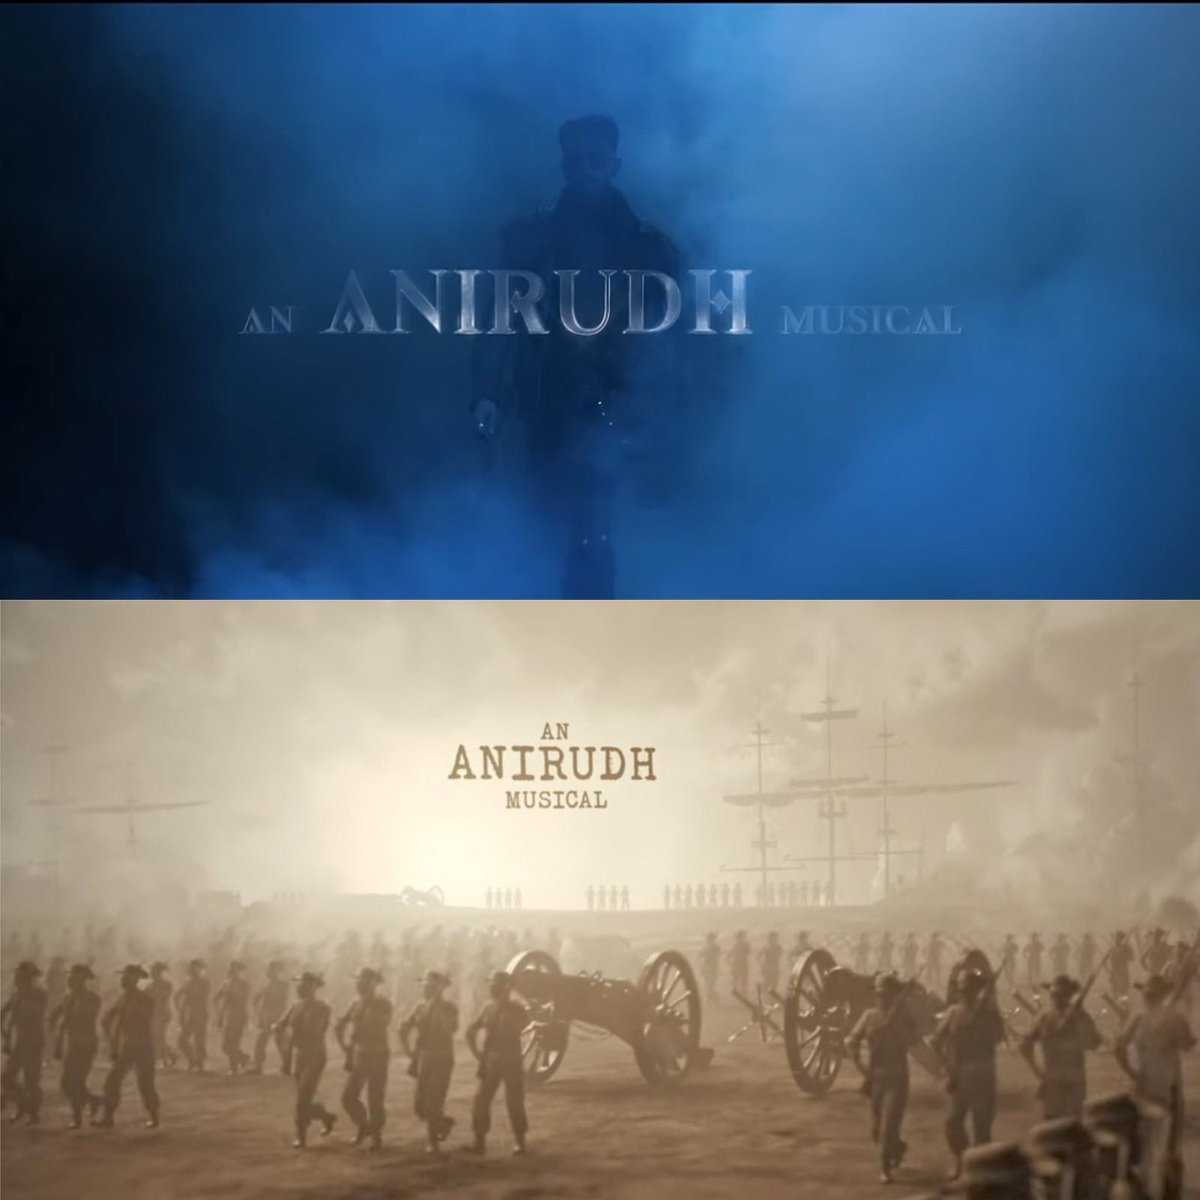 2 Chartbusters in 3 Days in 2 Languages

The Name is #RockstarAnirudh 🔥